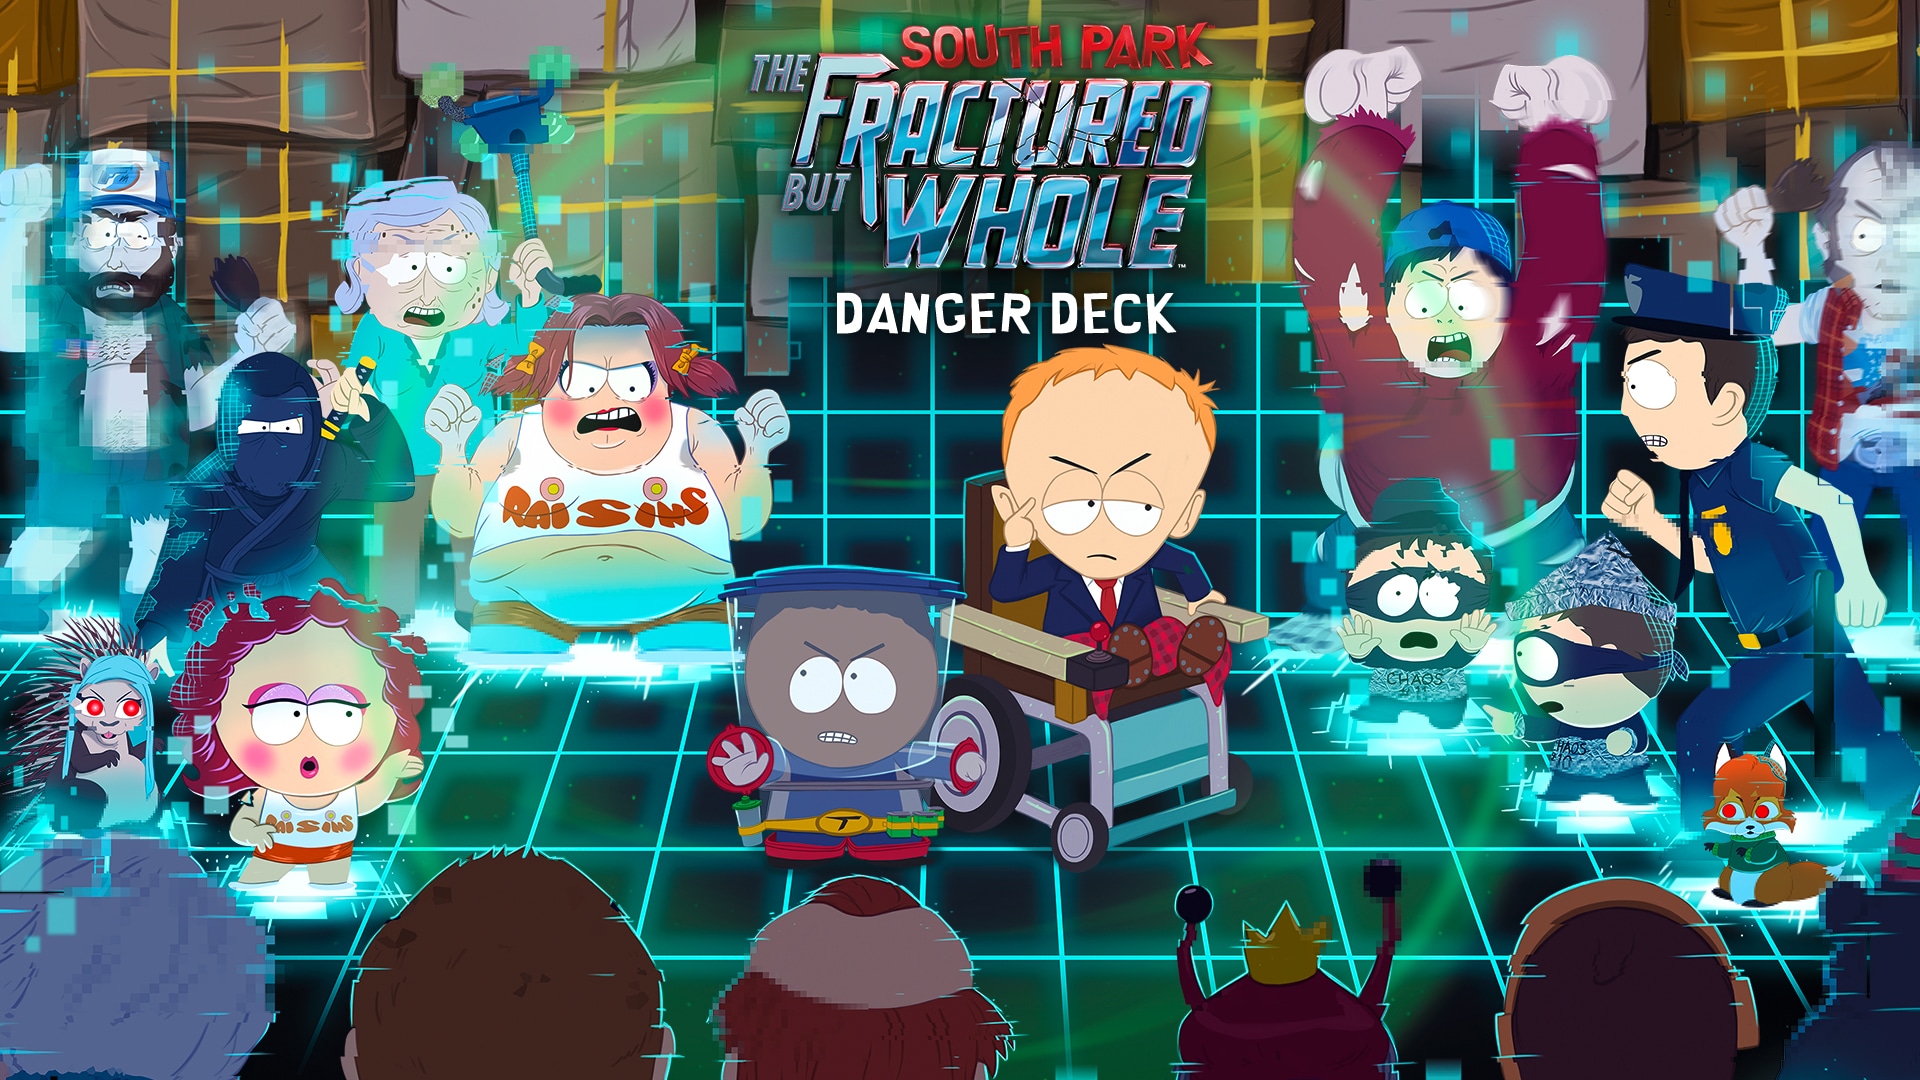 South Park The Fractured But Whole Danger Deck Review